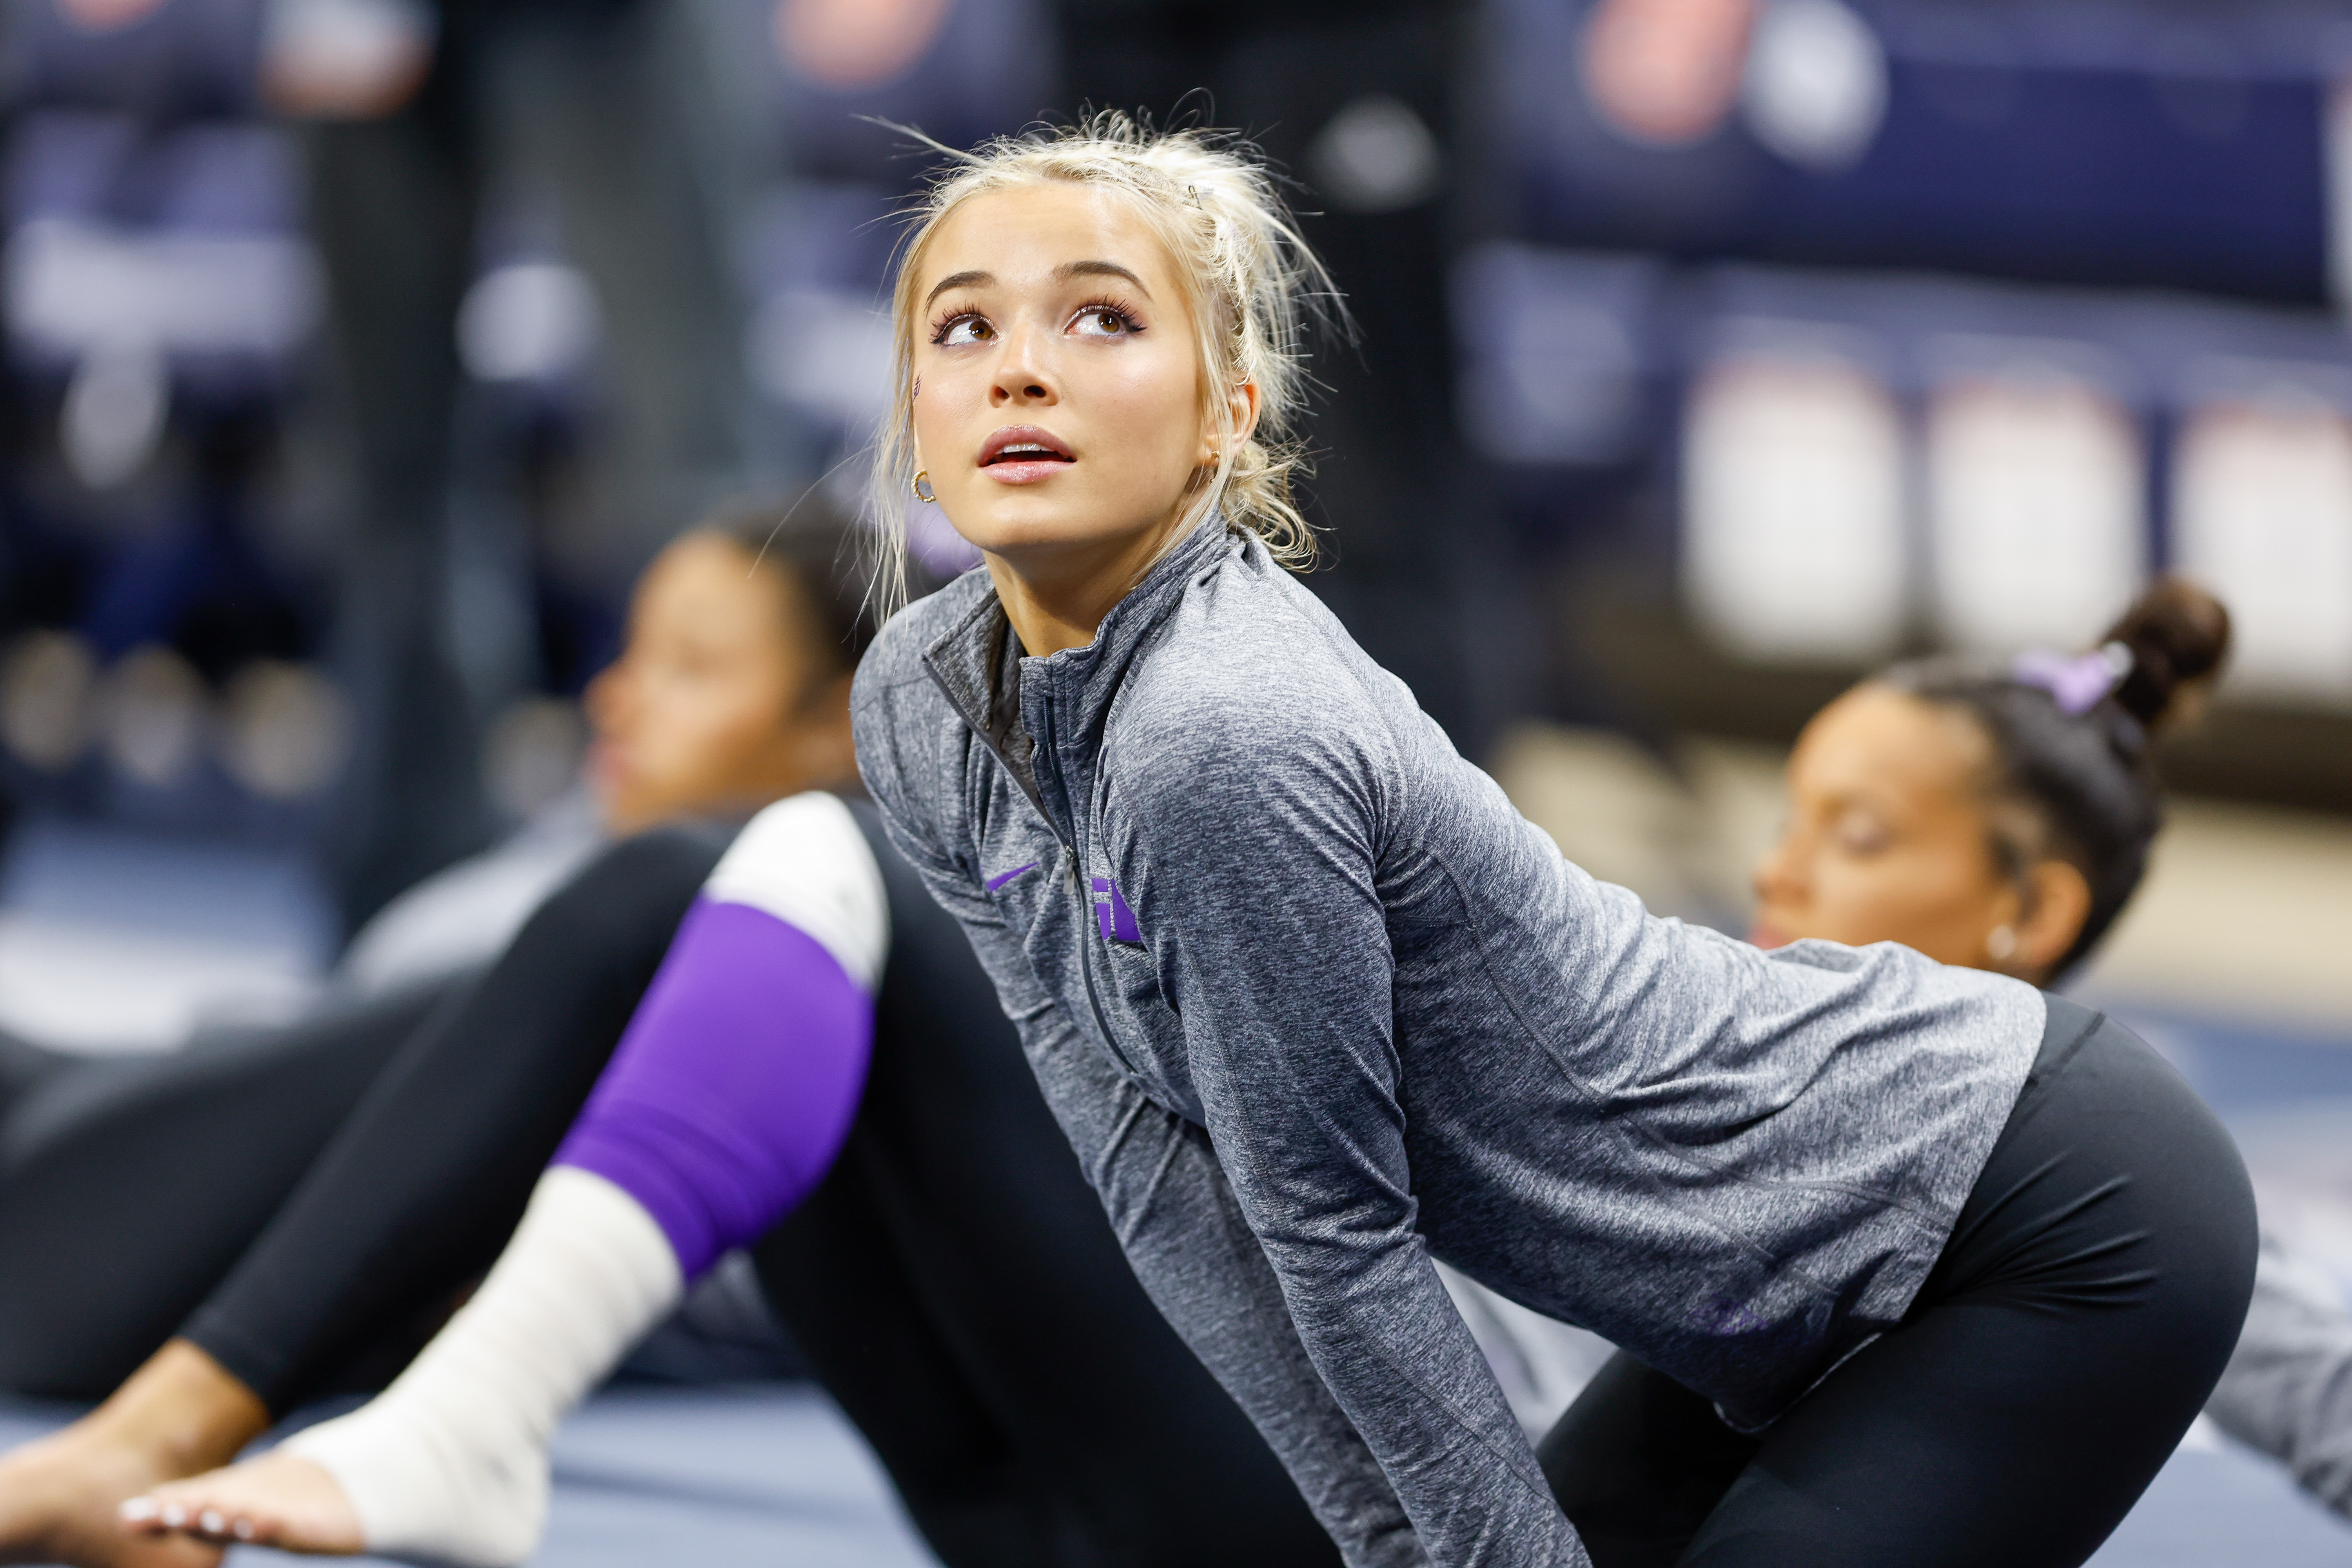 Olivia hasn't appeared in LSU's last gymnastics meets as questions have been raised on her unavailability